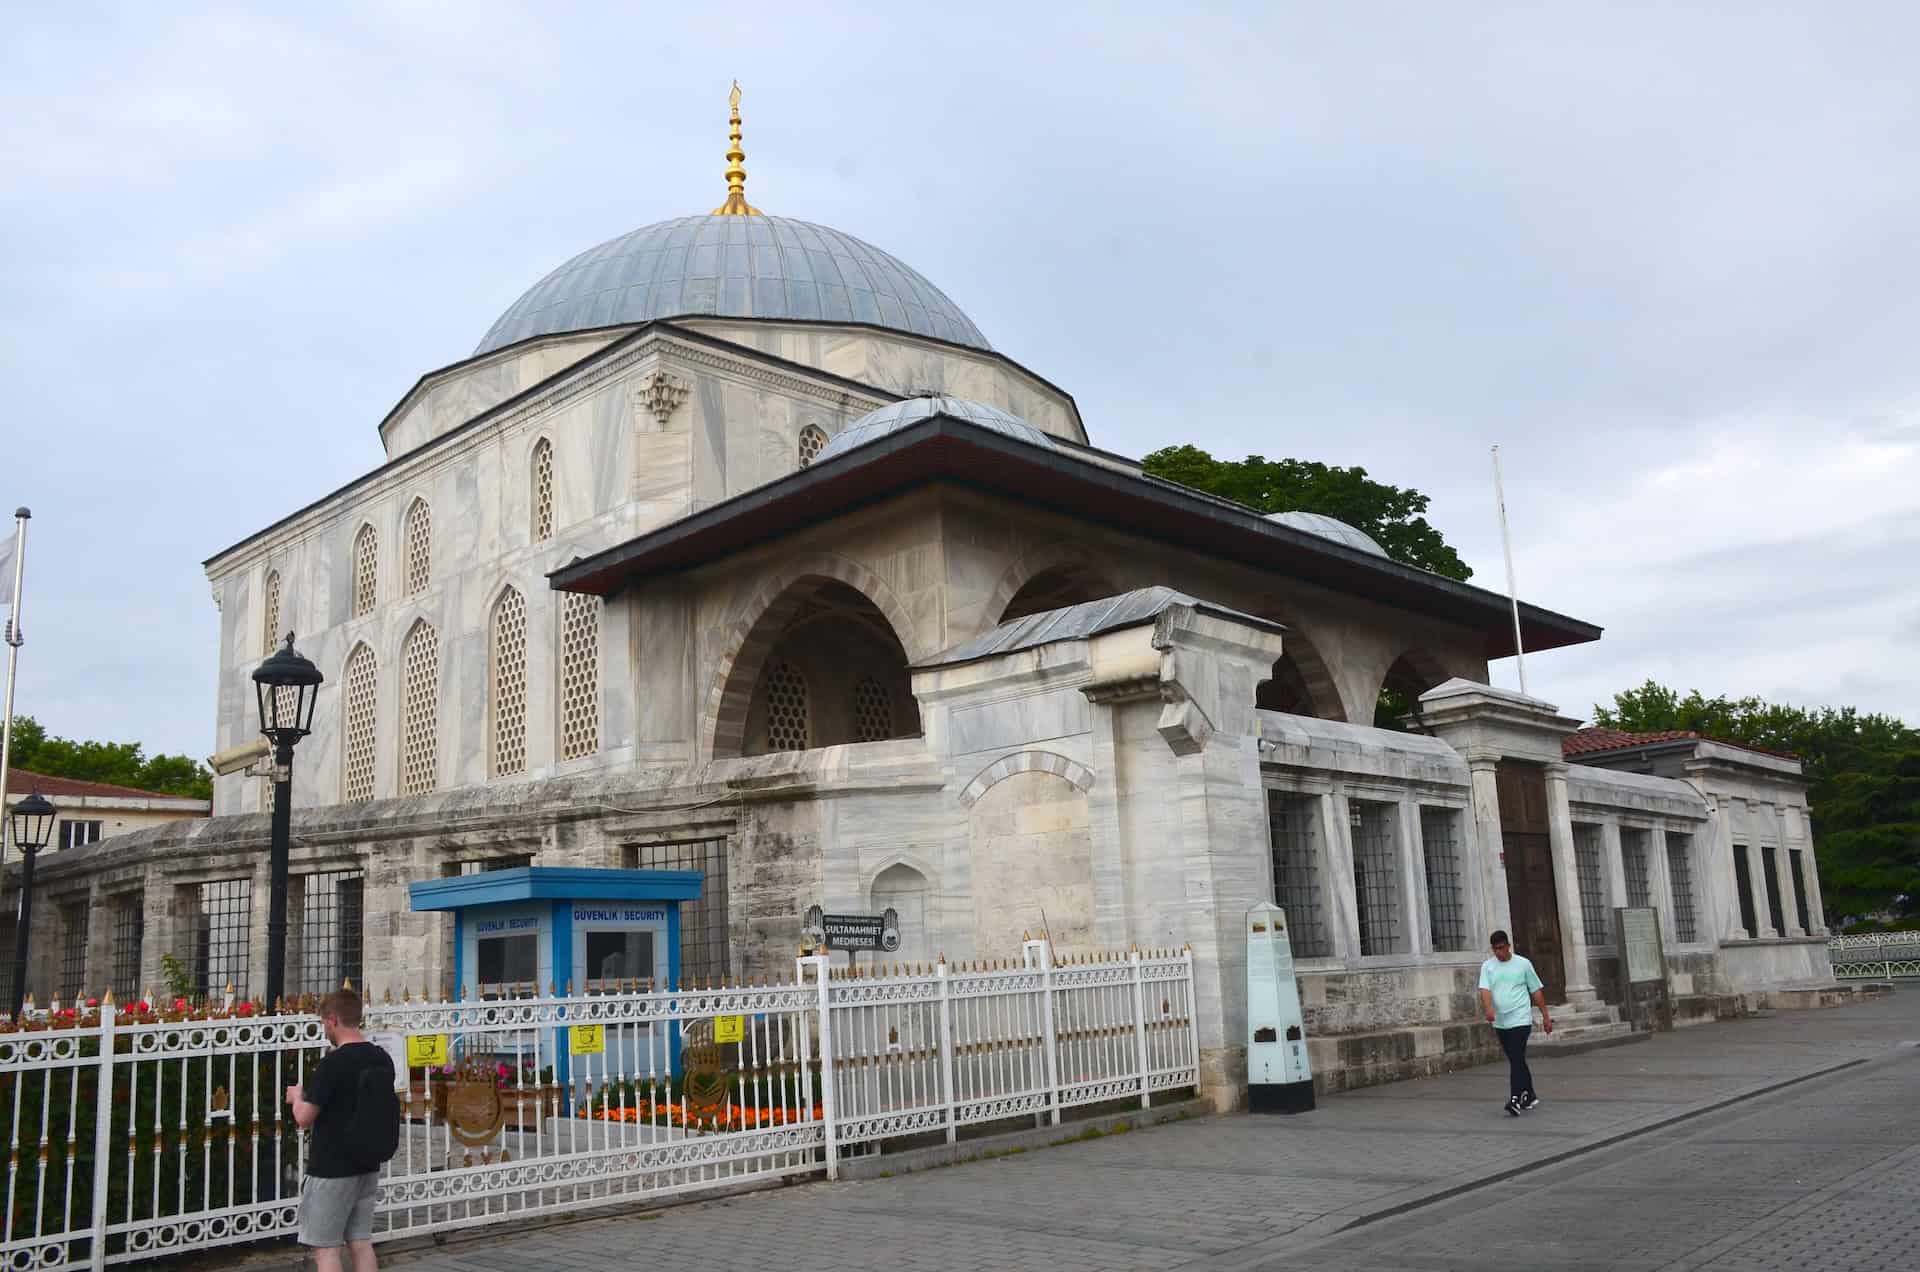 Tomb of Ahmed I in Sultanahmet, Istanbul, Turkey